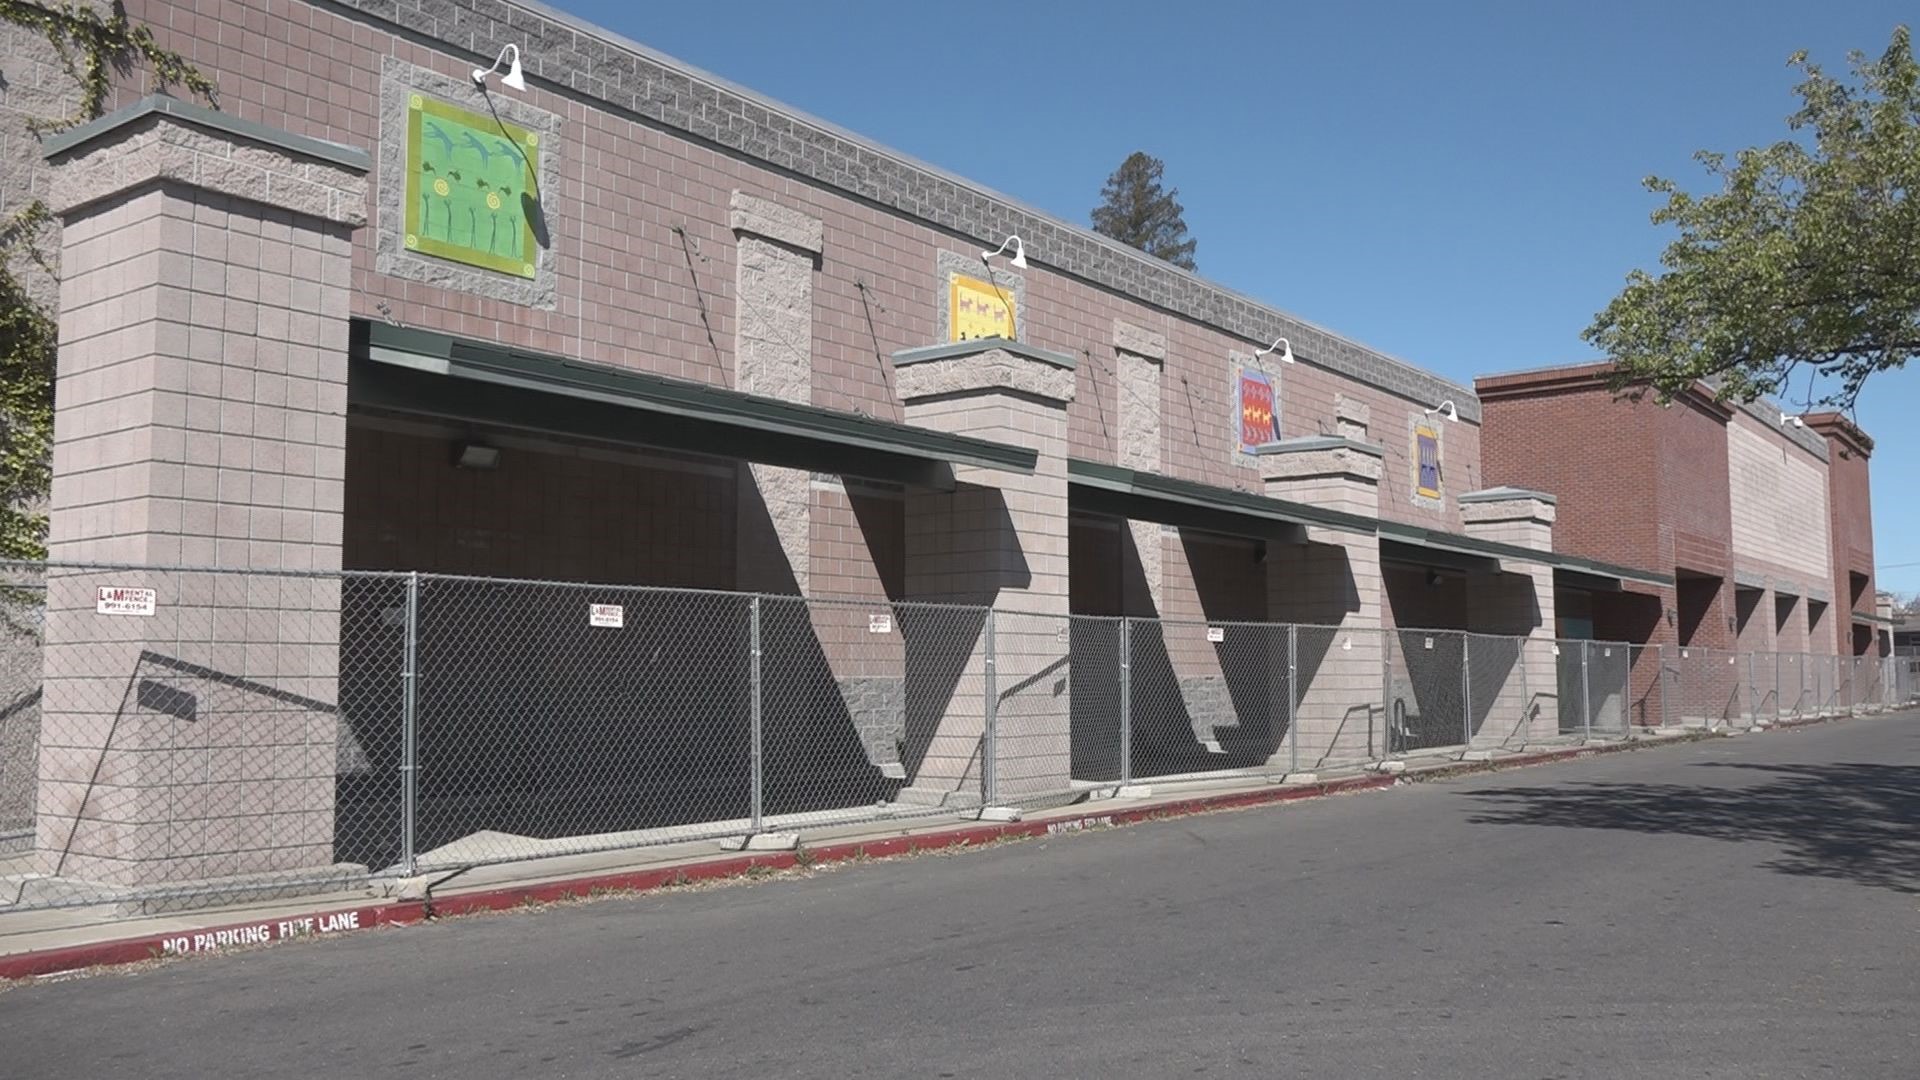 If the city council approves a $1.1-million loan next month, the grocery store will open in the fall.